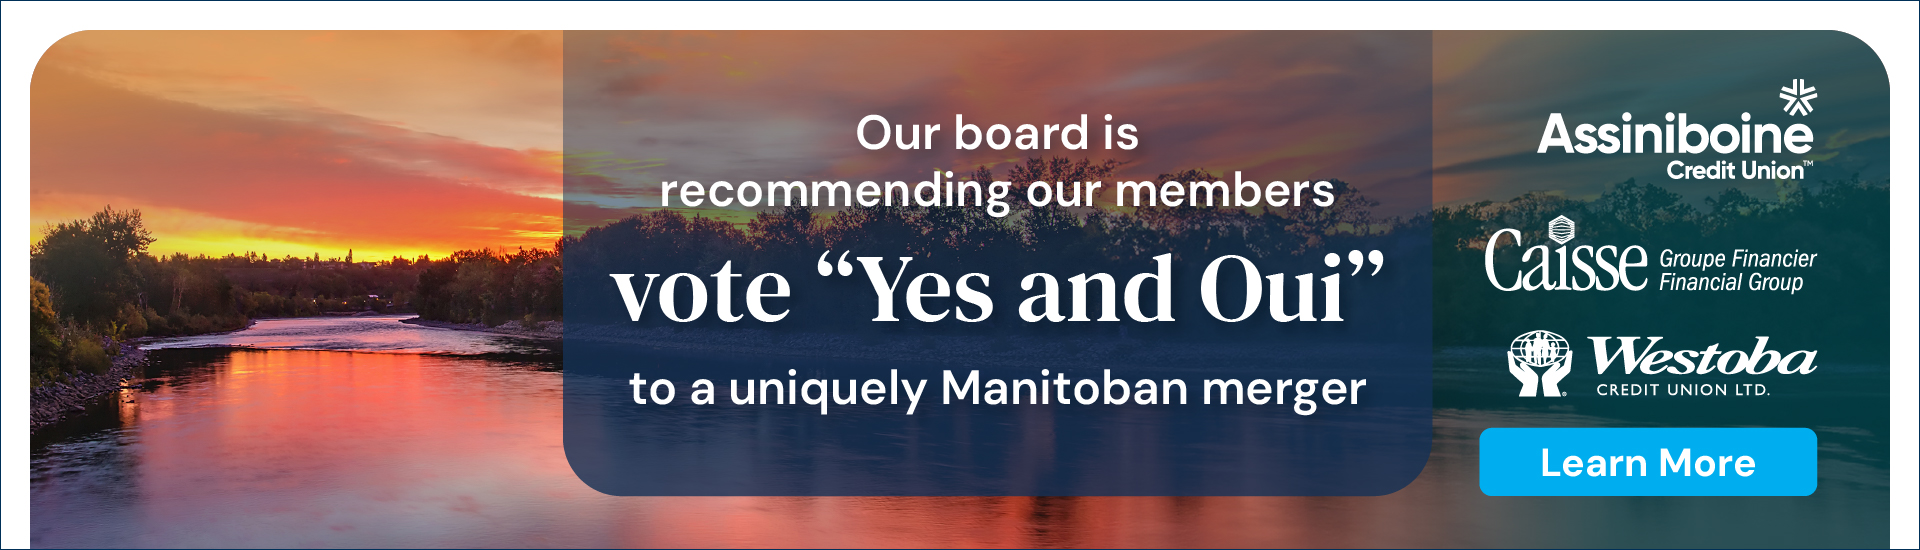 Our Board is recommending our members vote yes and oui